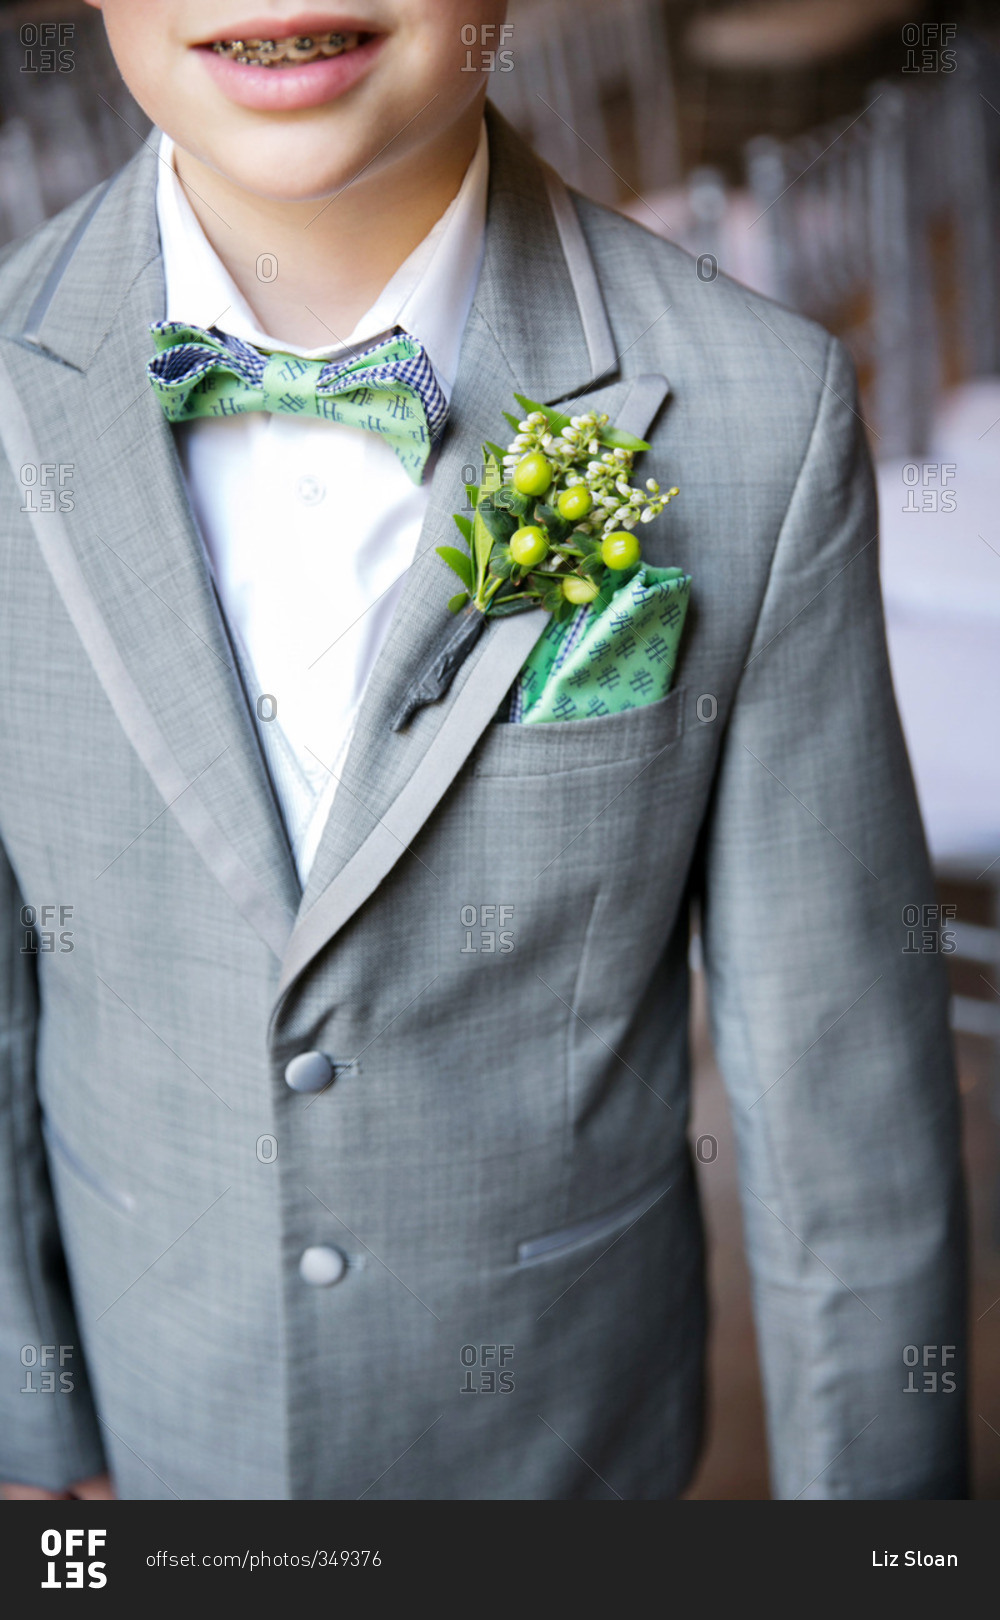 Close-up of a ring bearer's boutonniere and pocket square